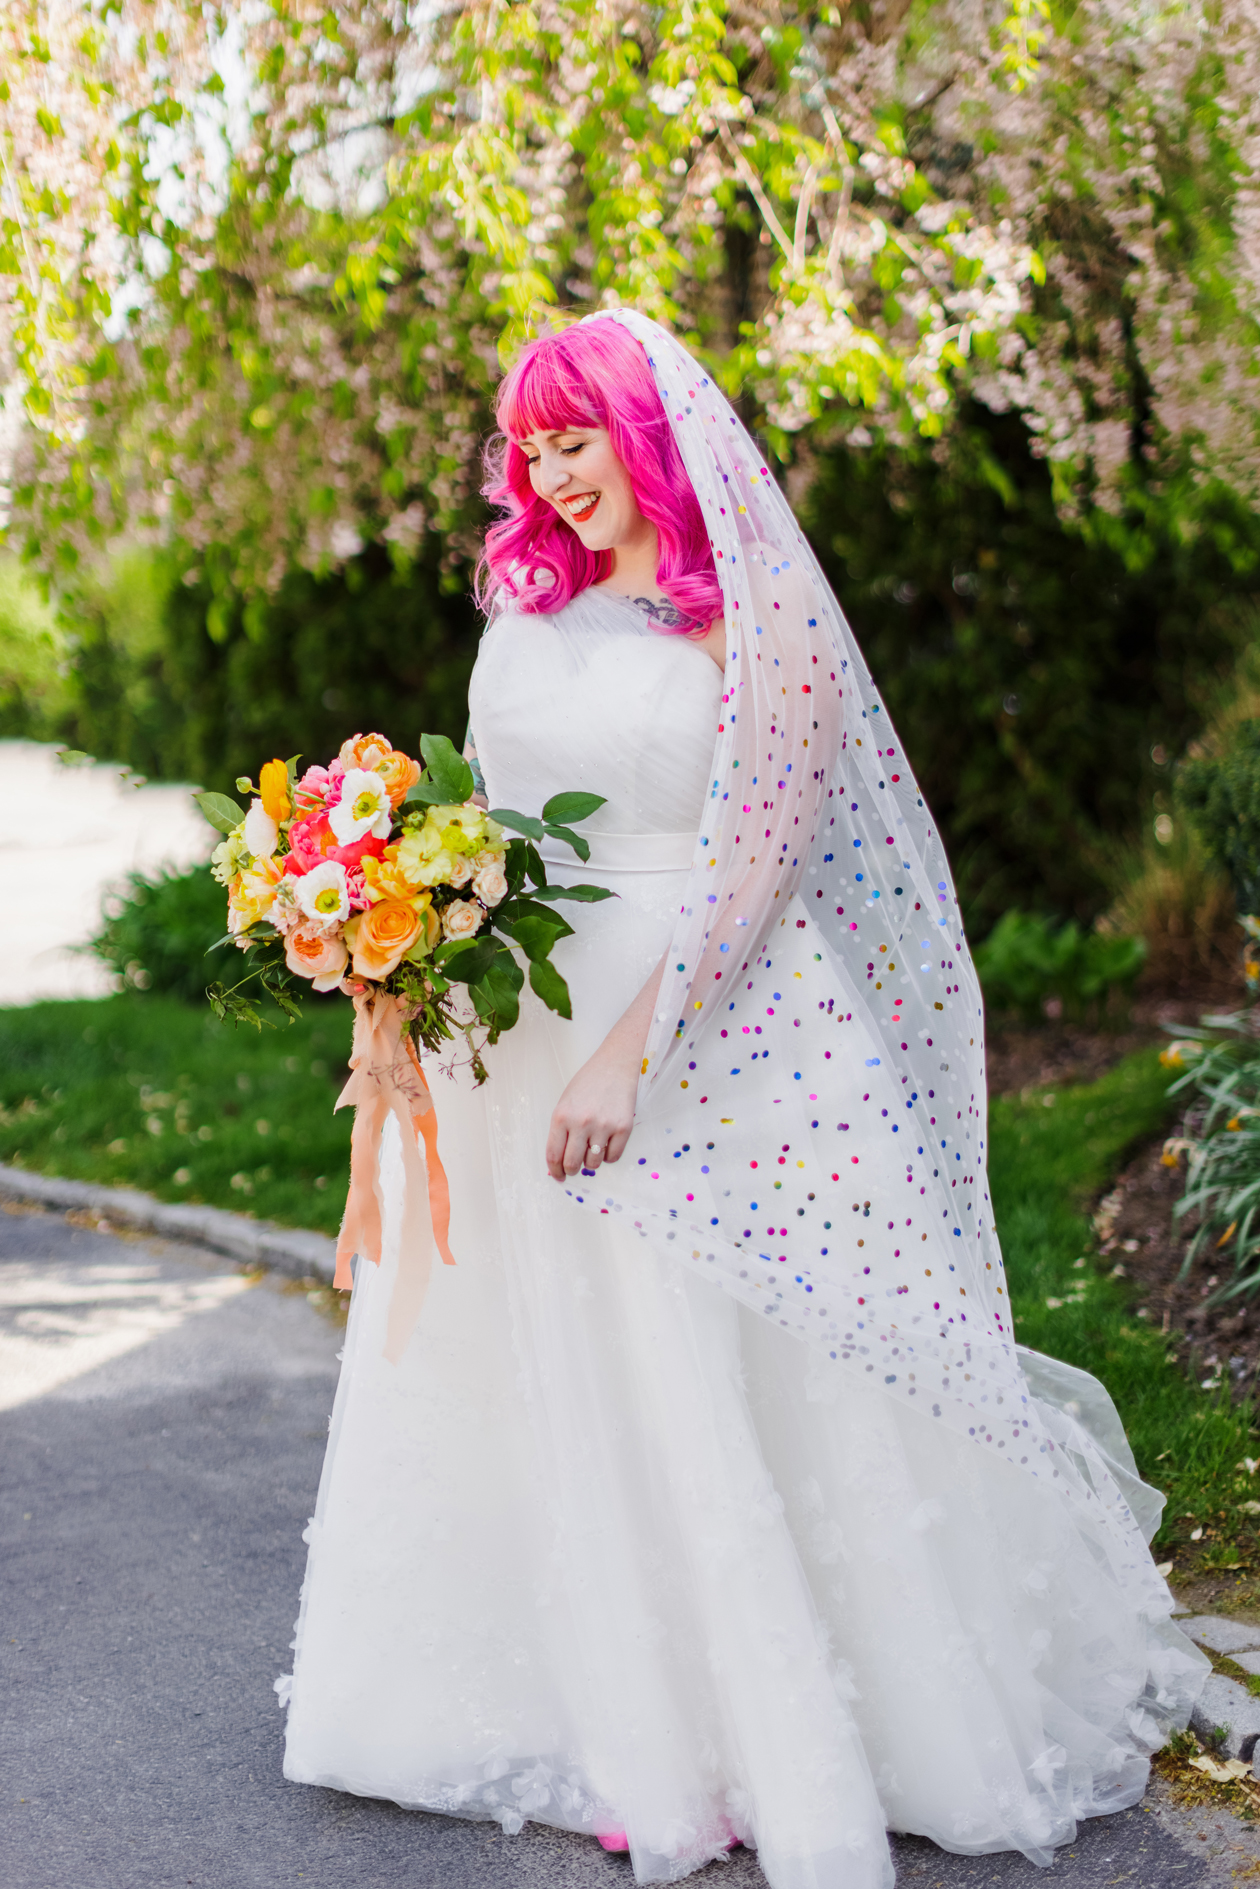 Add color to your wedding by wearing a confetti veil! Not only is it a unique veil but it goes with any wedding dress.